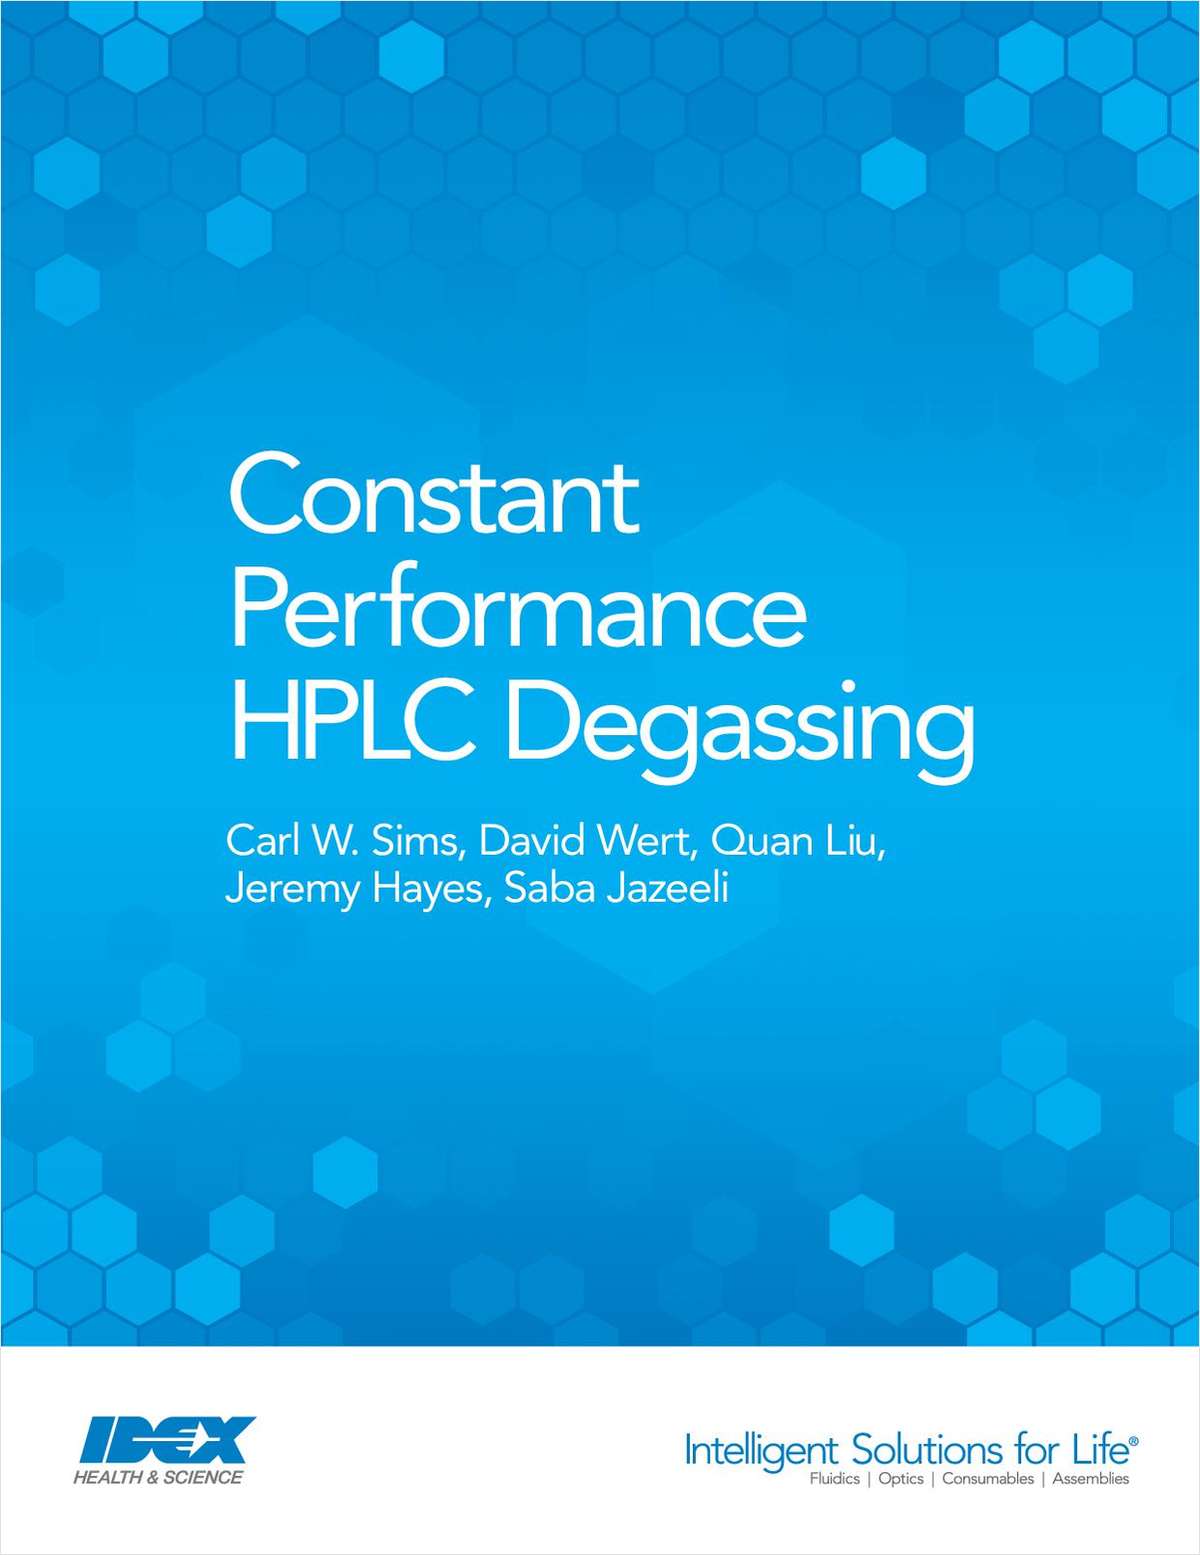 Constant Performance System Degassing